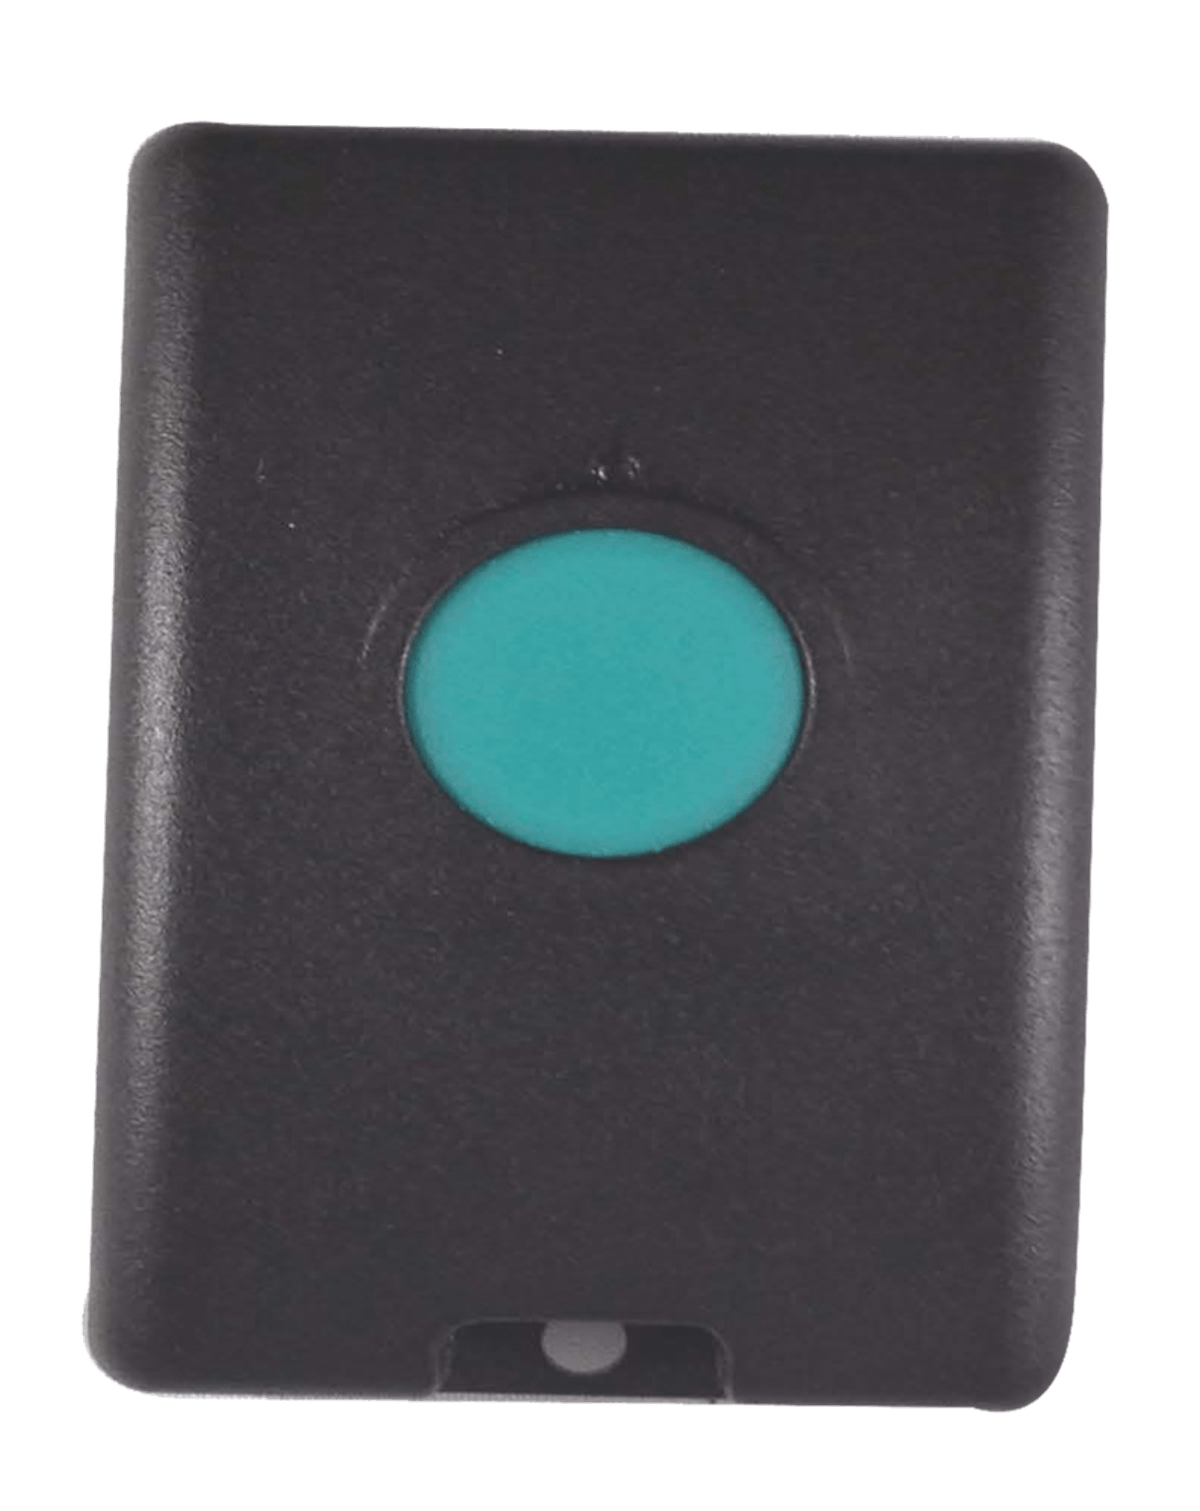 Alarm Lock fob, remote release and receiver